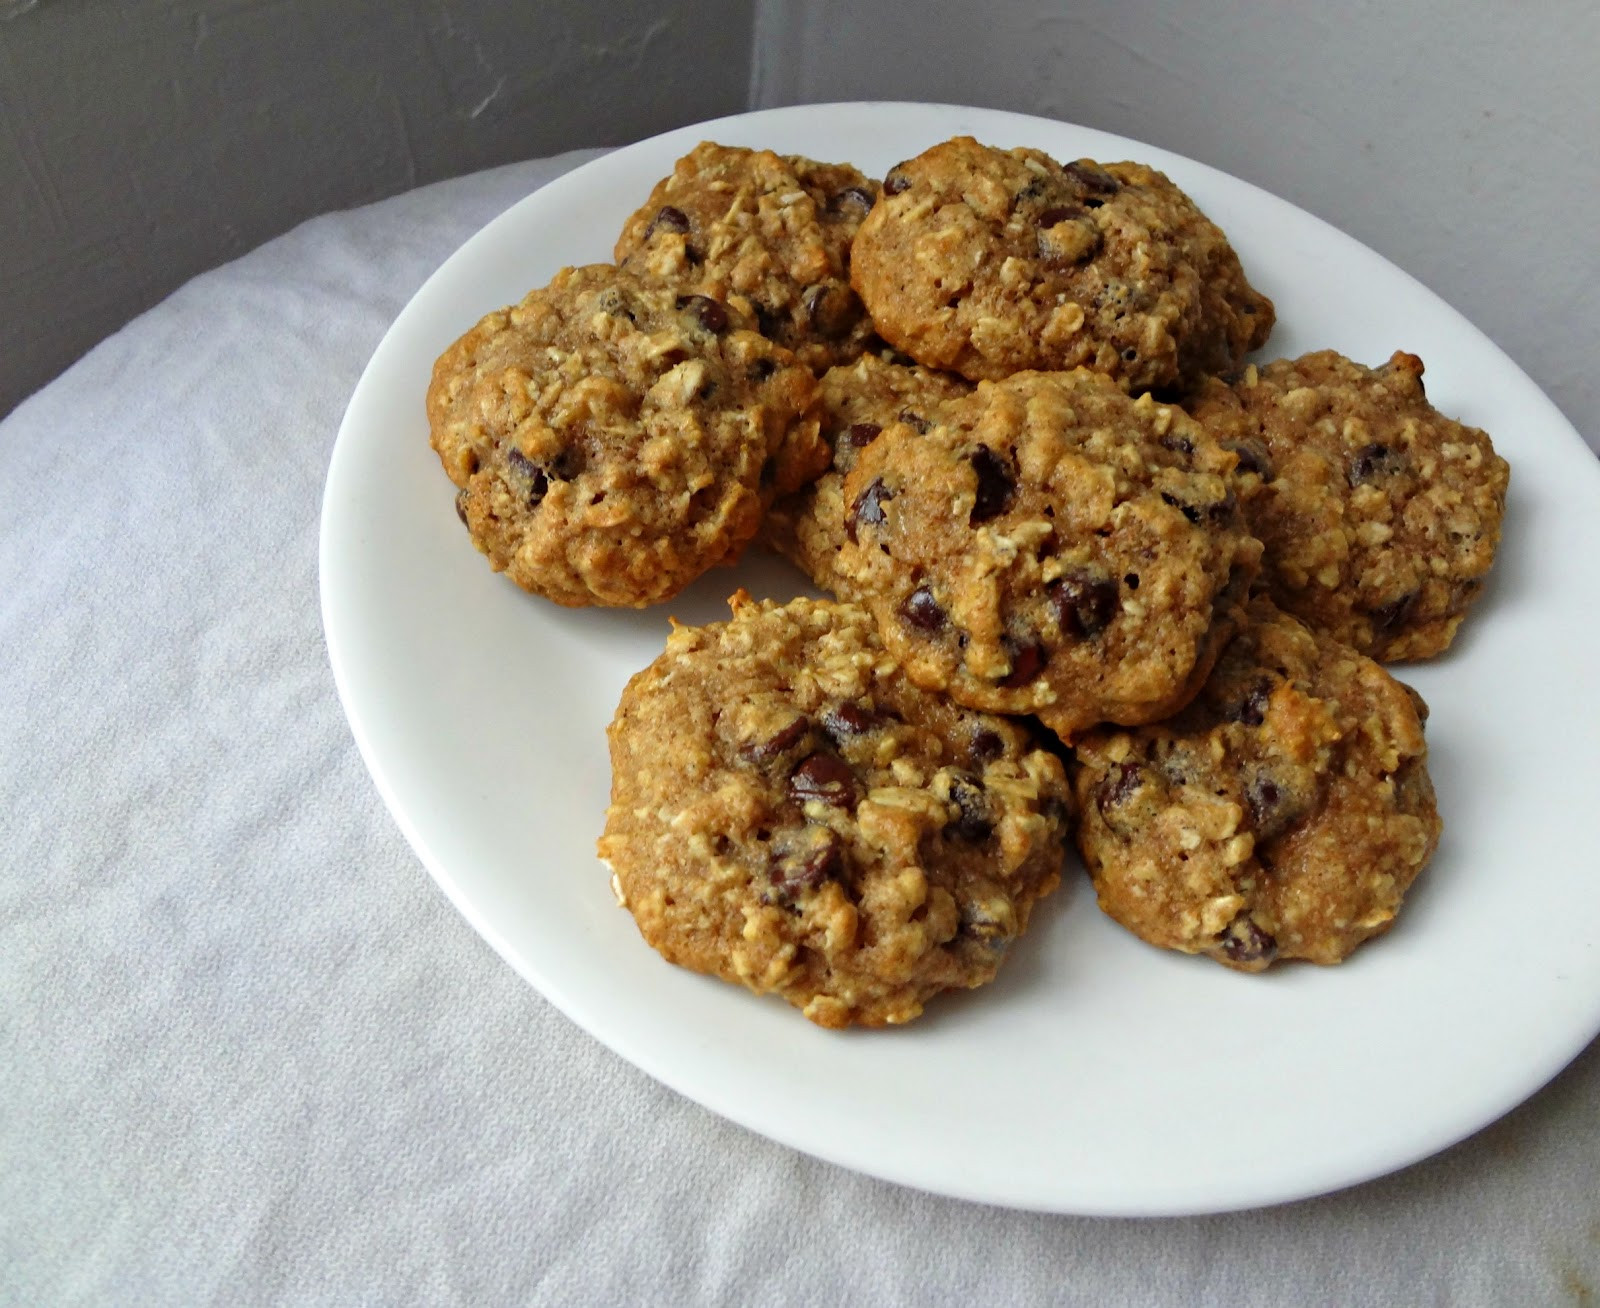 Choc Chip Oatmeal Cookies Healthy
 The Cooking Actress Healthy Oatmeal Chocolate Chip Cookies